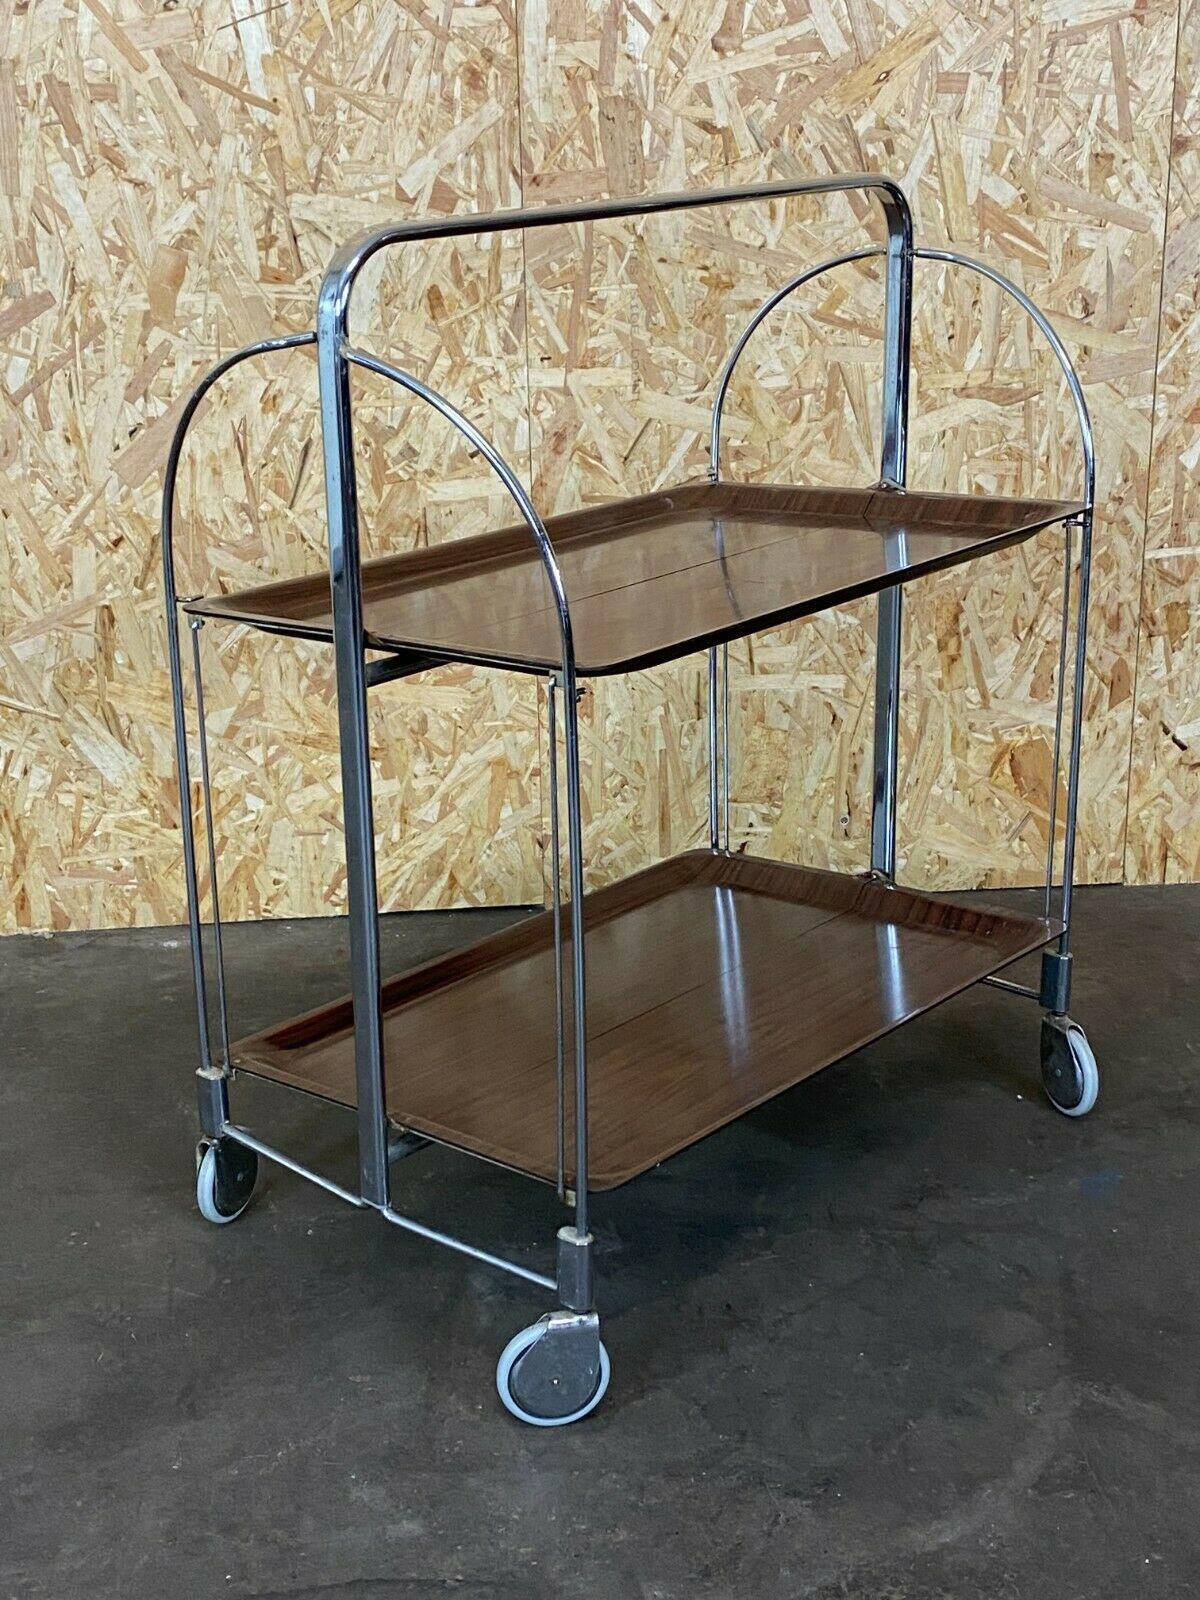 60s 70s serving trolley Dinett side table space age brown design 60s 70s

Object: Serving trolley

Manufacturer:

Condition: good

Age: around 1960-1970

Dimensions:

68cm x 42cm x 72cm

Other notes:

The pictures serve as part of